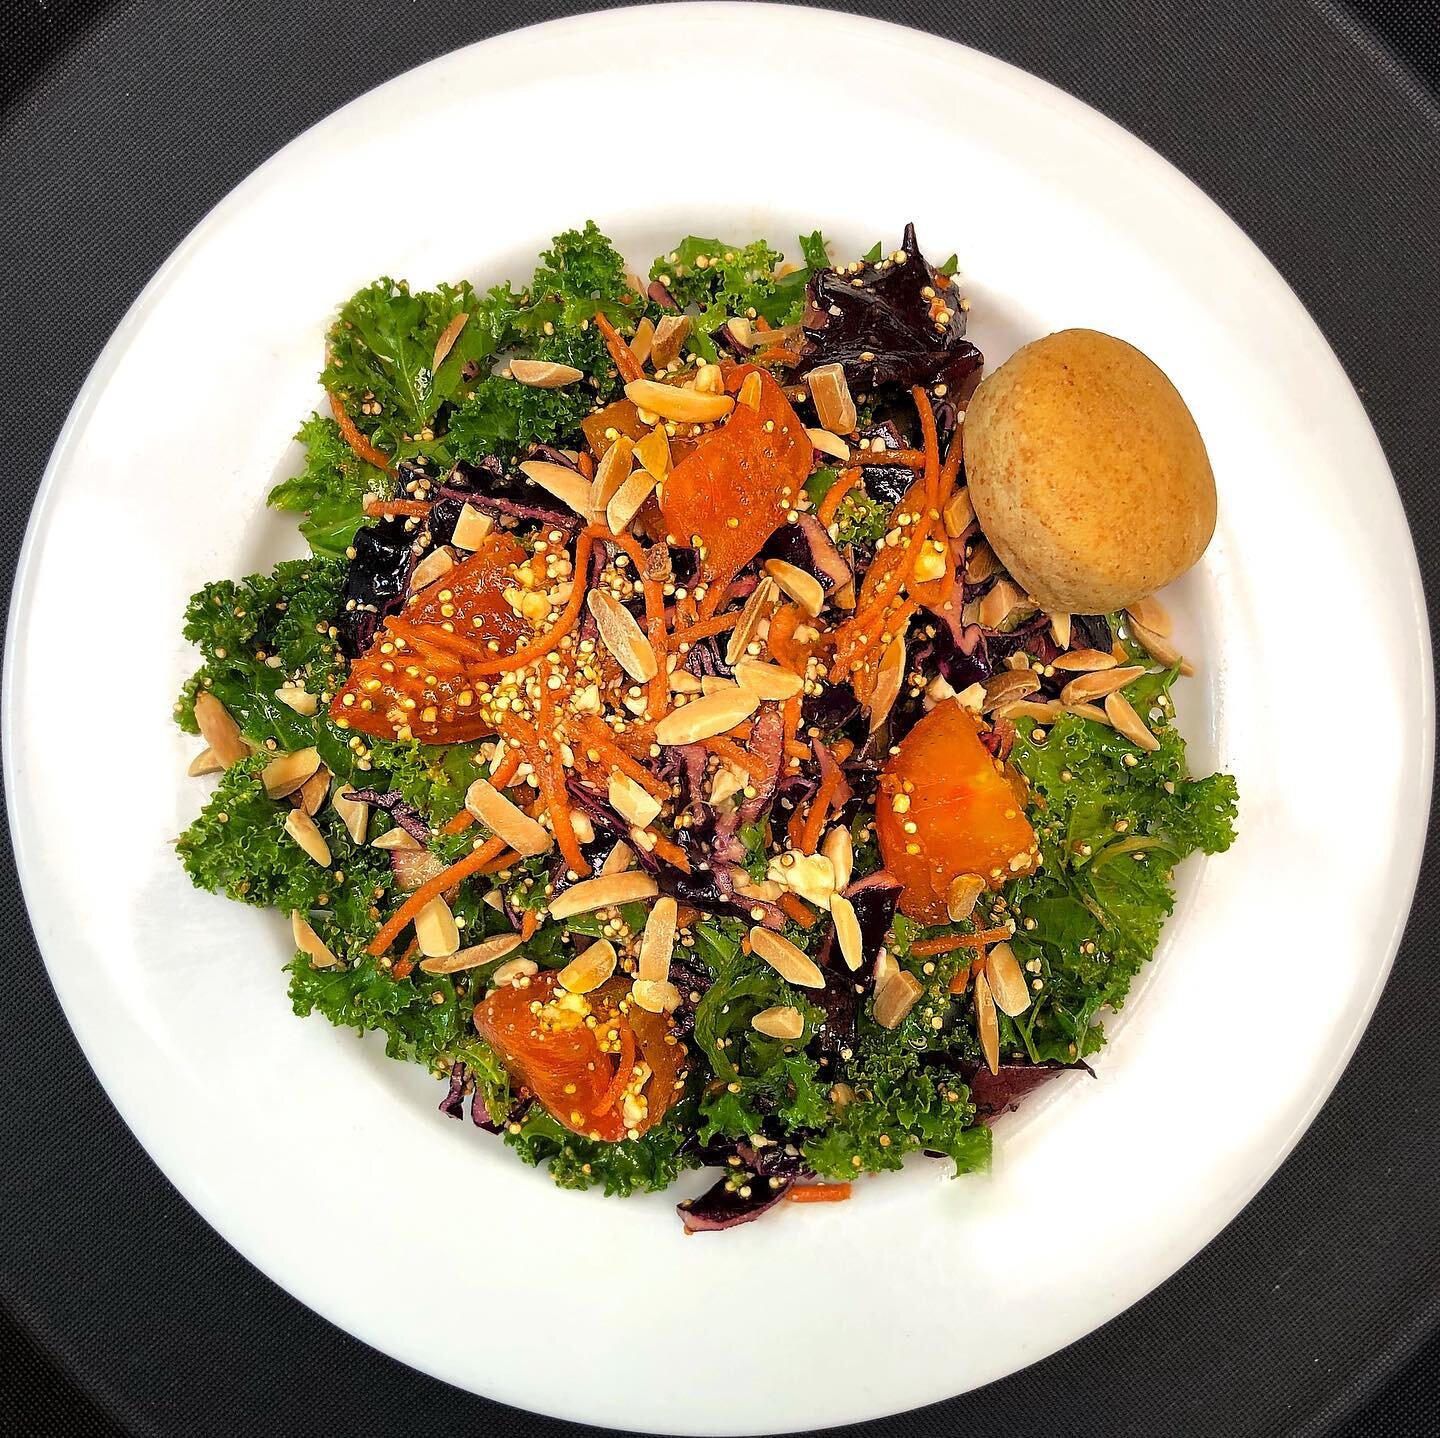 Spring is here and so is Baladi&rsquo;s Spring Salad.  Fresh kale, sweet grape tomatoes, crumbled feta, red cabbage, slivered almonds, shredded carrots and roasted quinoa tossed in a honey vinaigrette.  YUM.  A must have.
#baladimediterraneancafe #ba